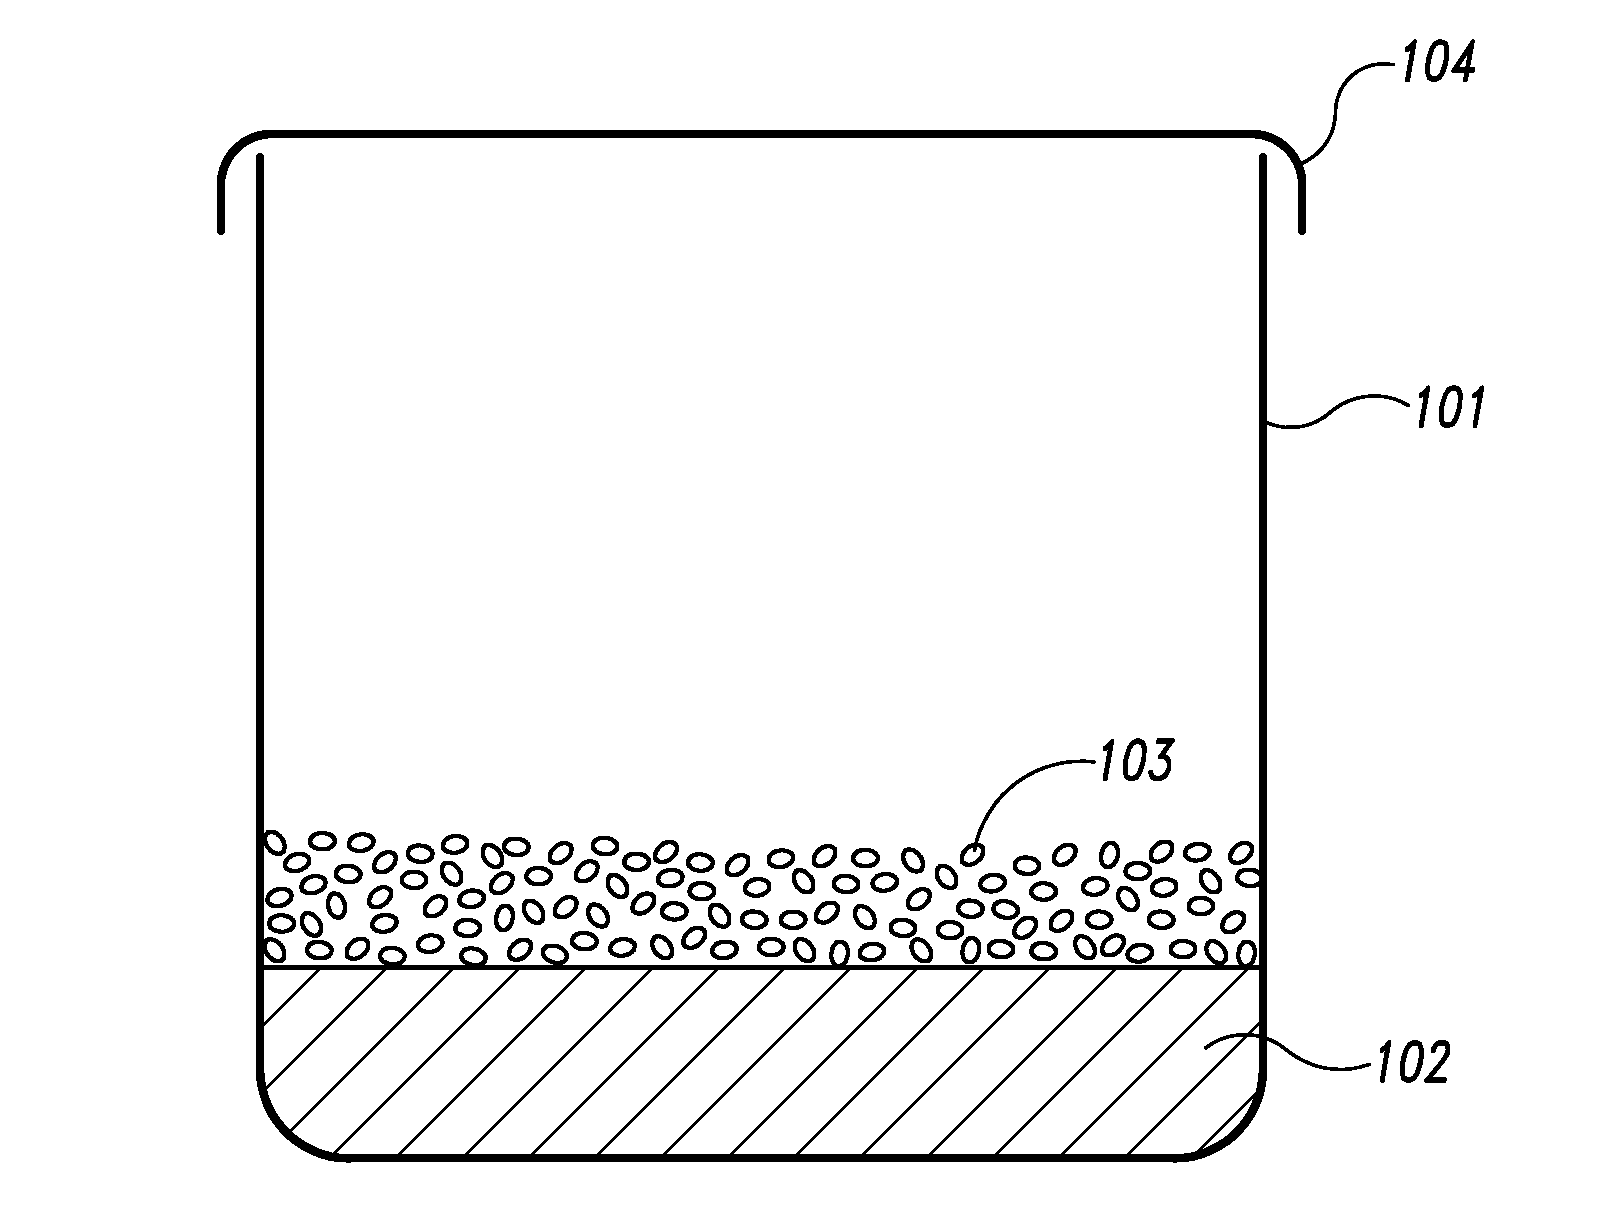 Method and apparatus for growing sprouts